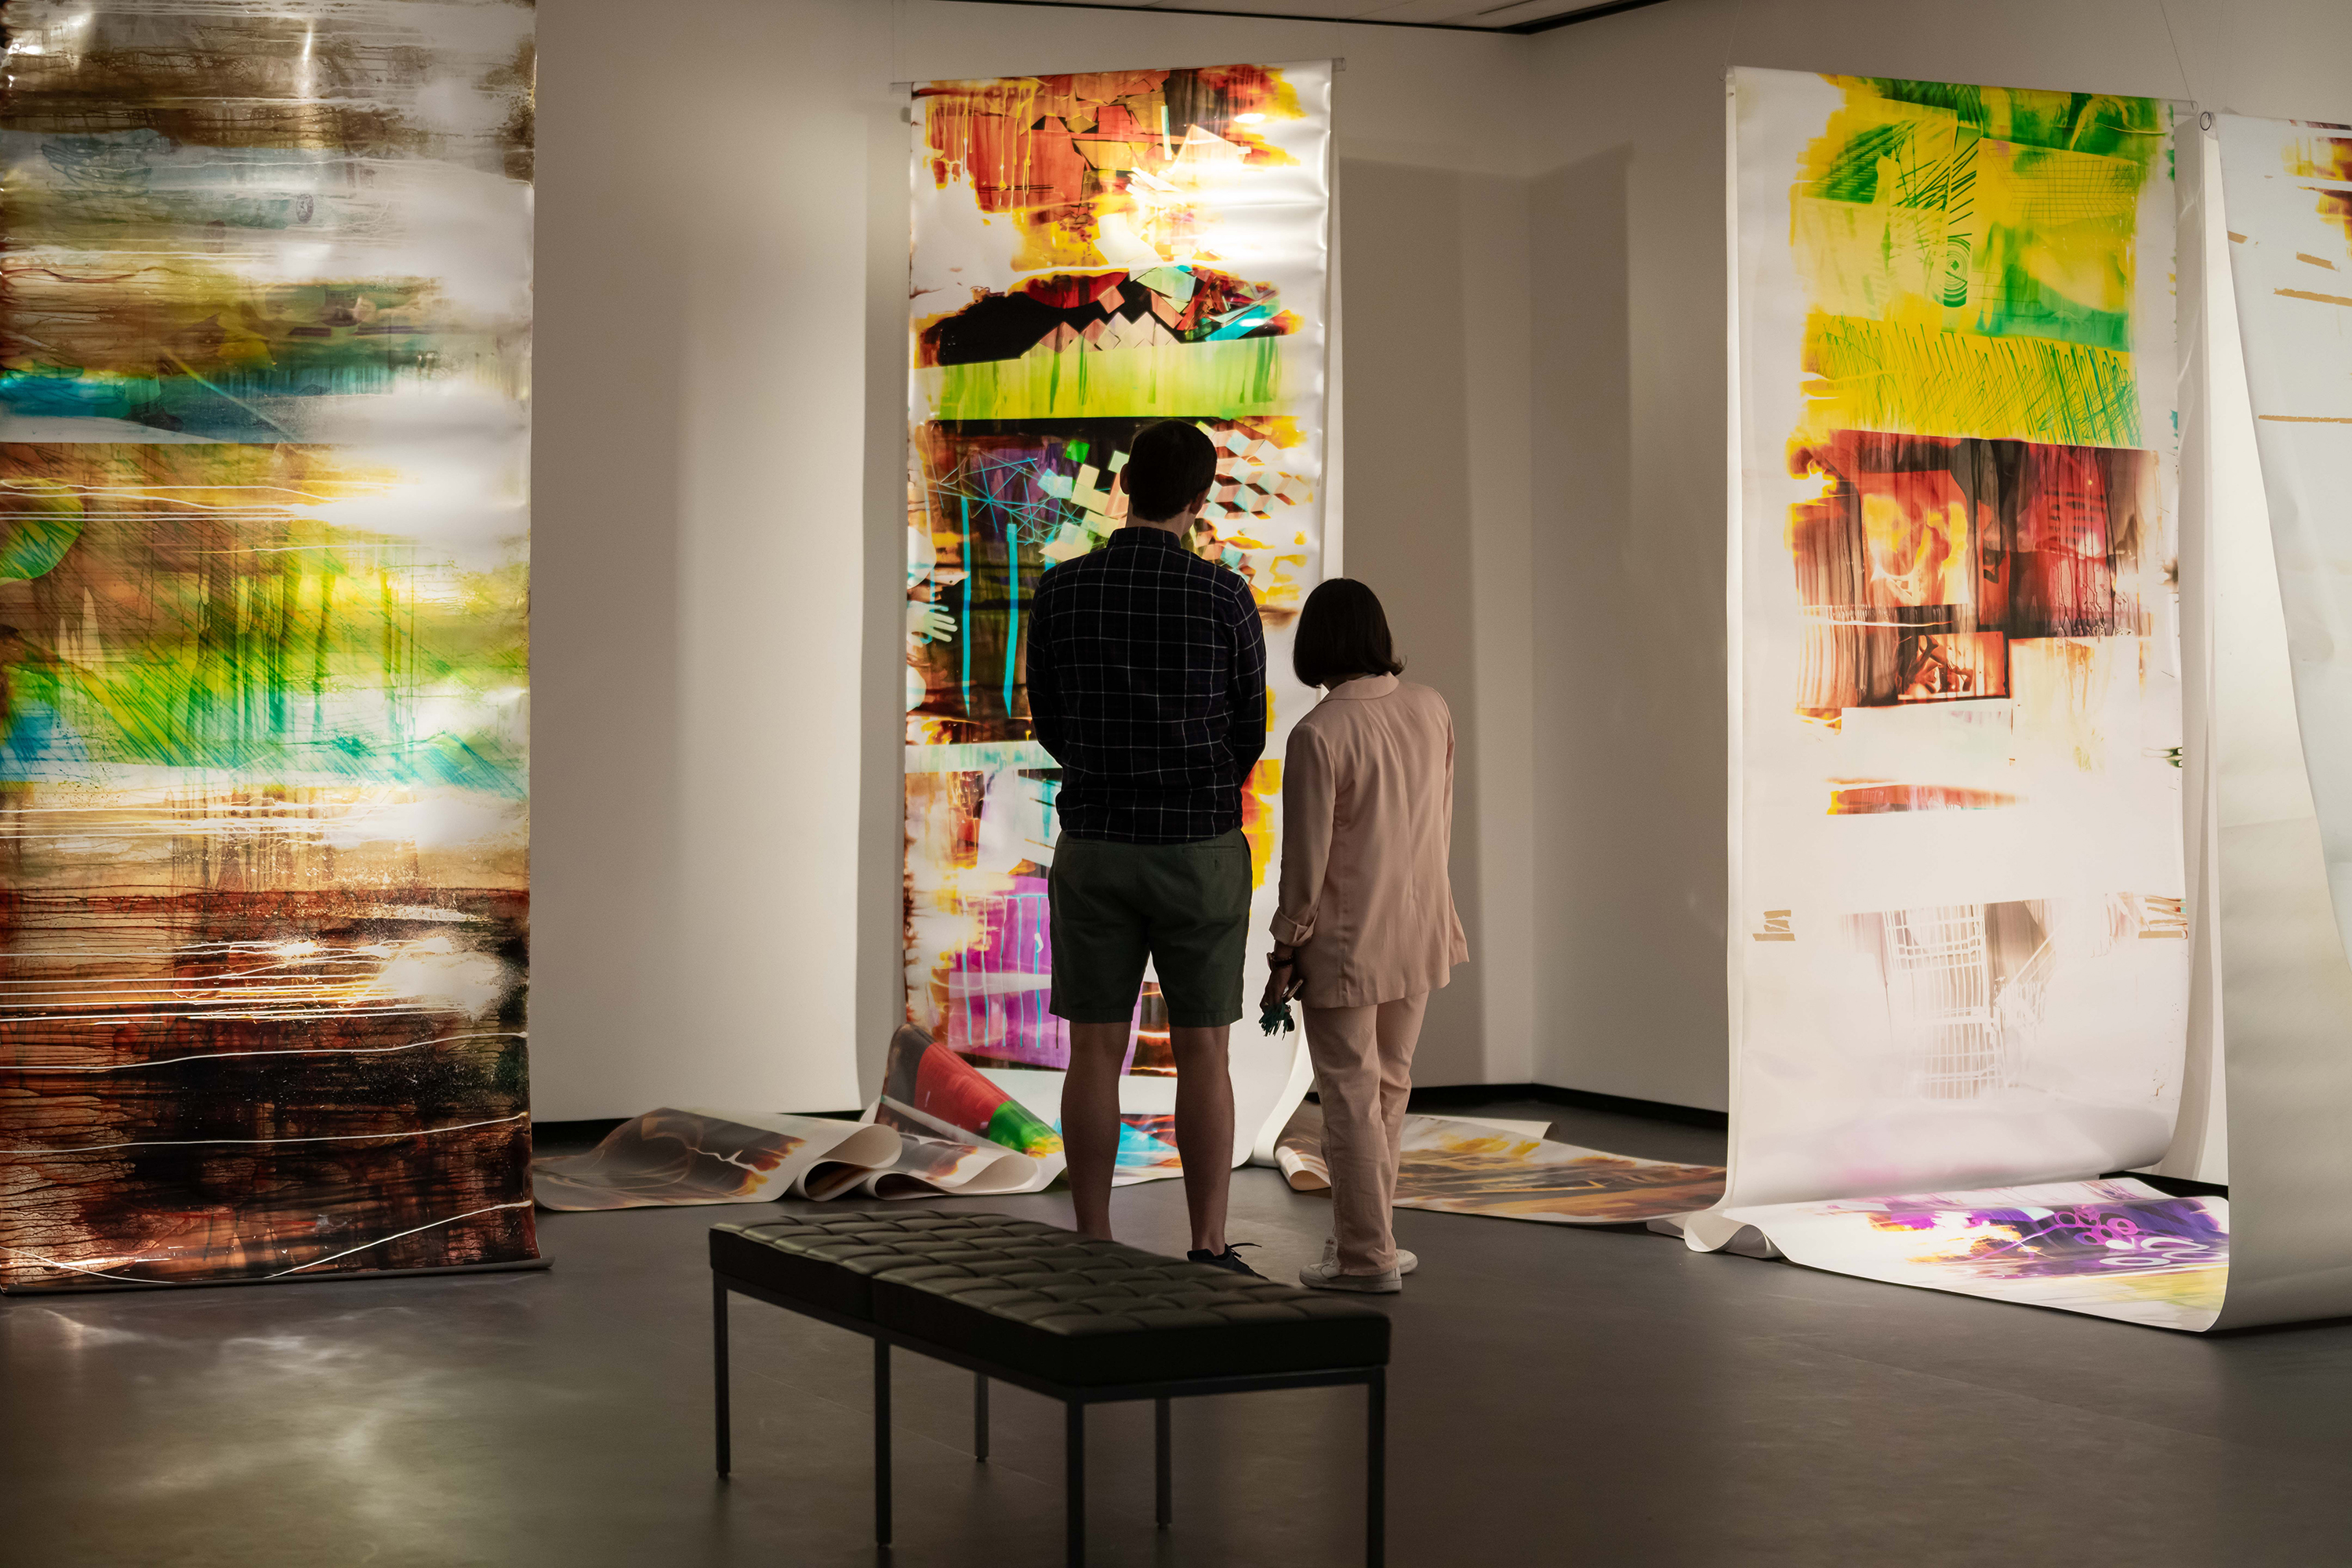 Two museum visitors are standing in front of an artwork. This large-scale, scrolling, colorful, abstract photograph is hung from the ceiling throughout the room.